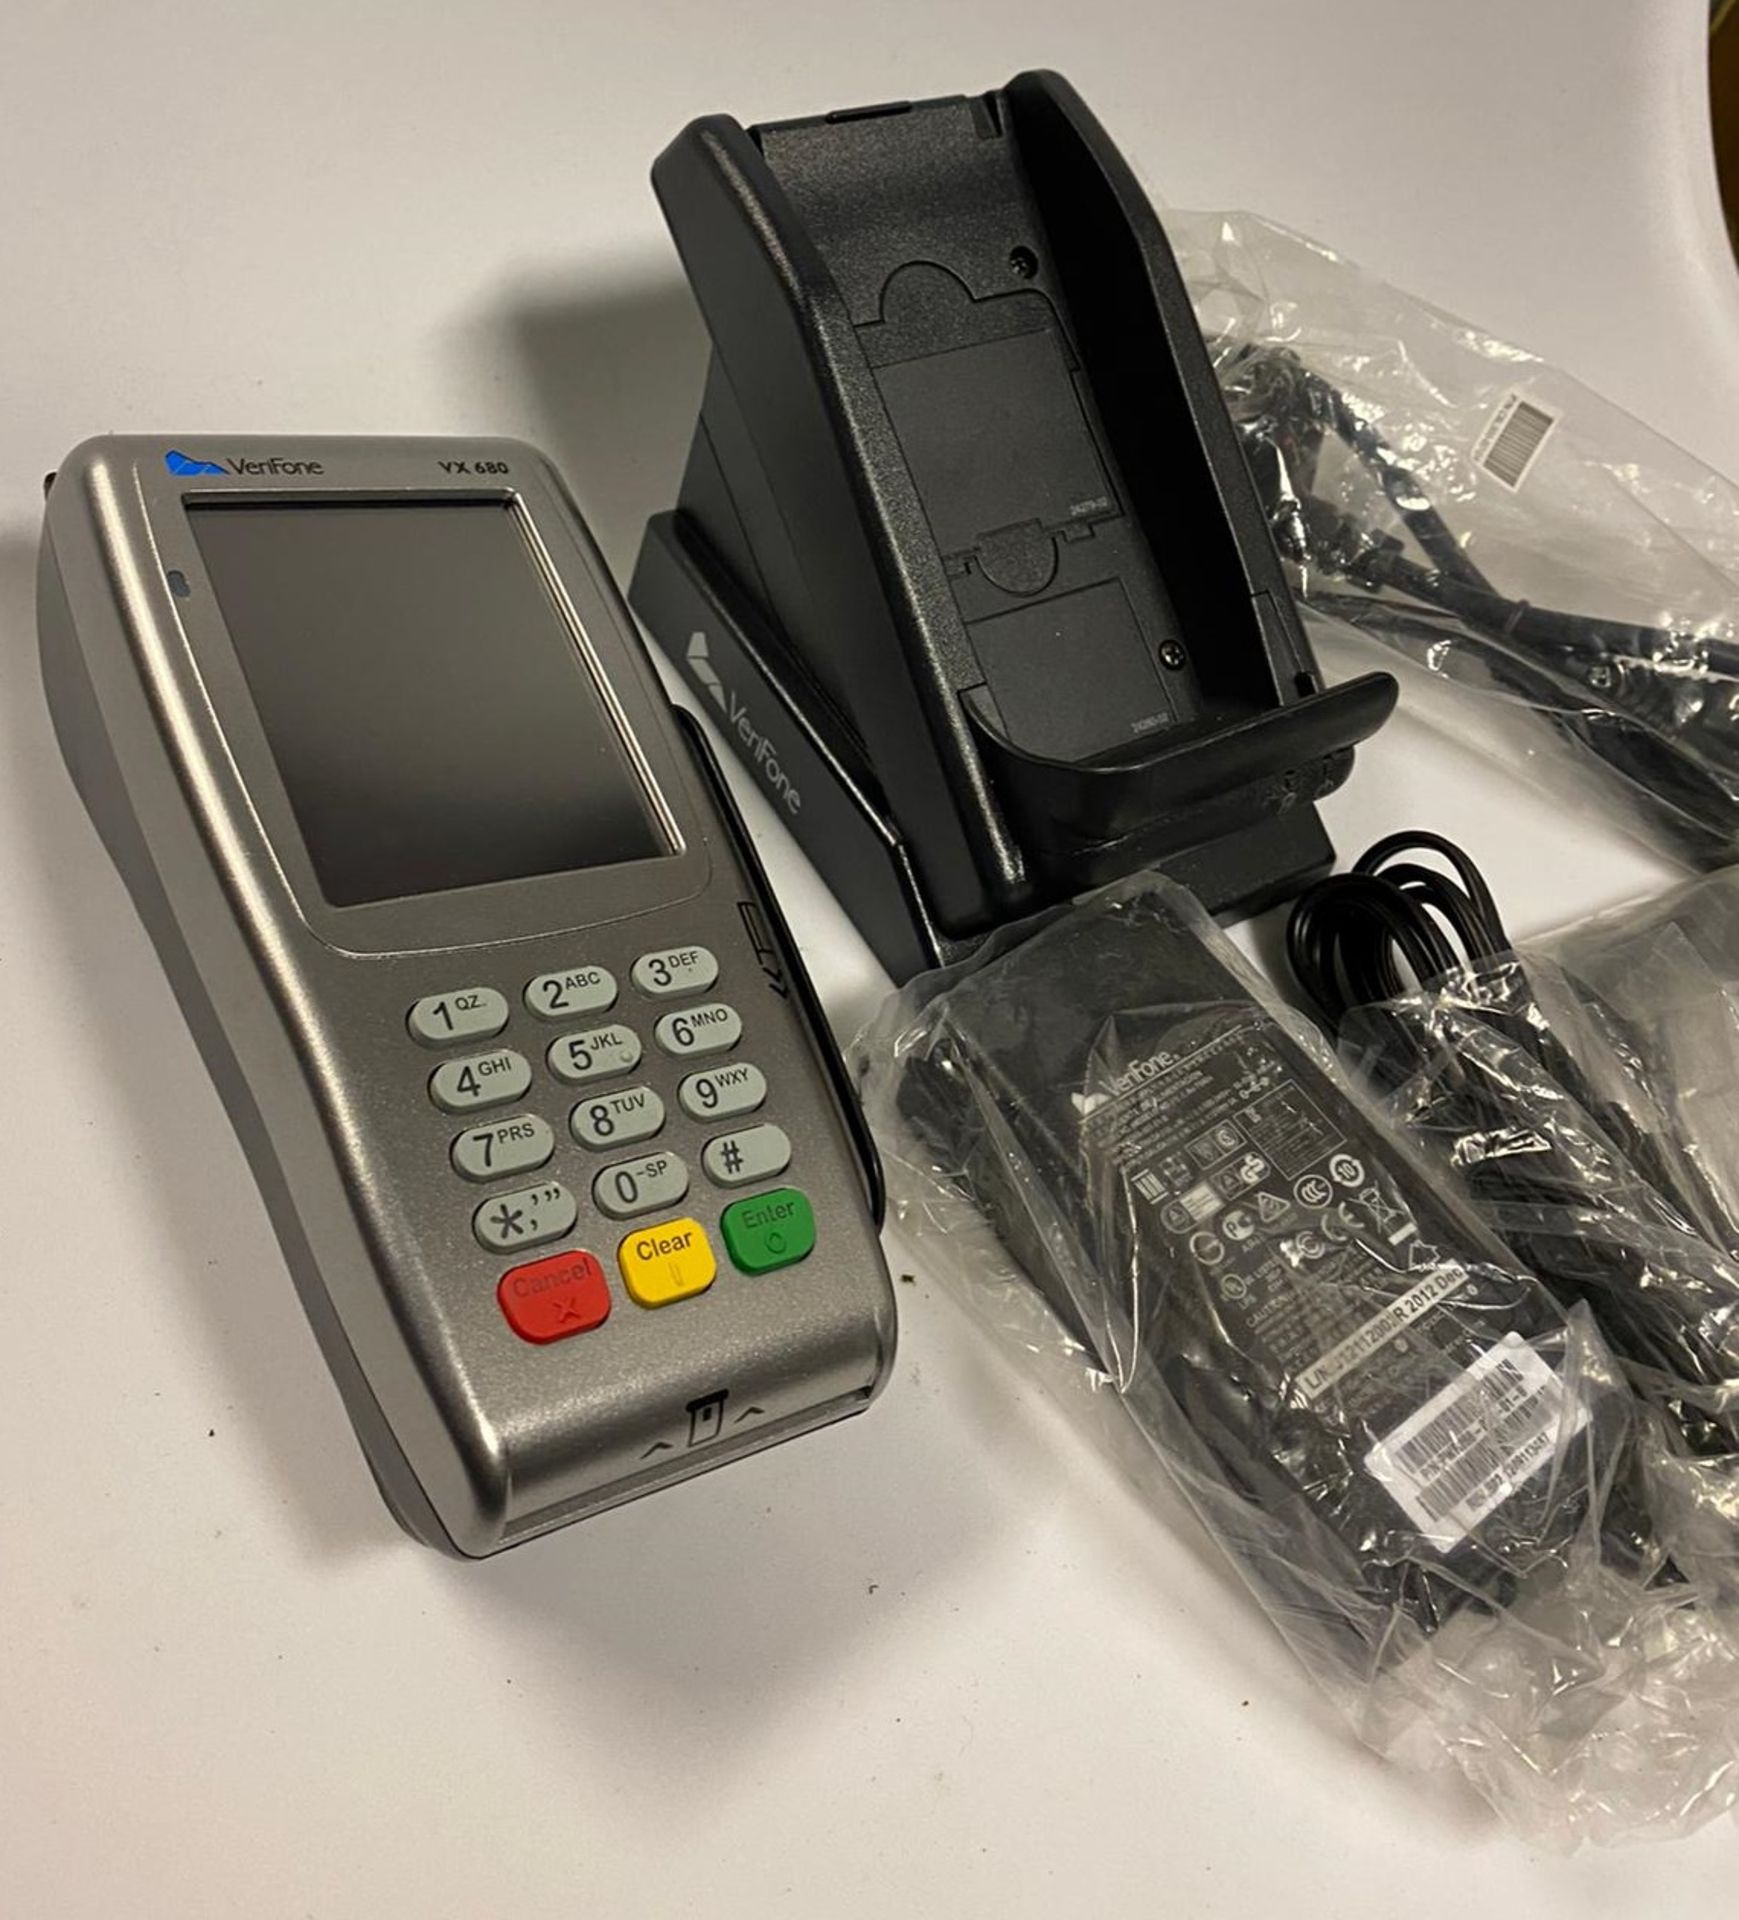 1 x Verifone VX 6803G EMV Smart/Chip Card & COntactless - New and Boxed - Location: Altrincham WA14 - Image 4 of 5